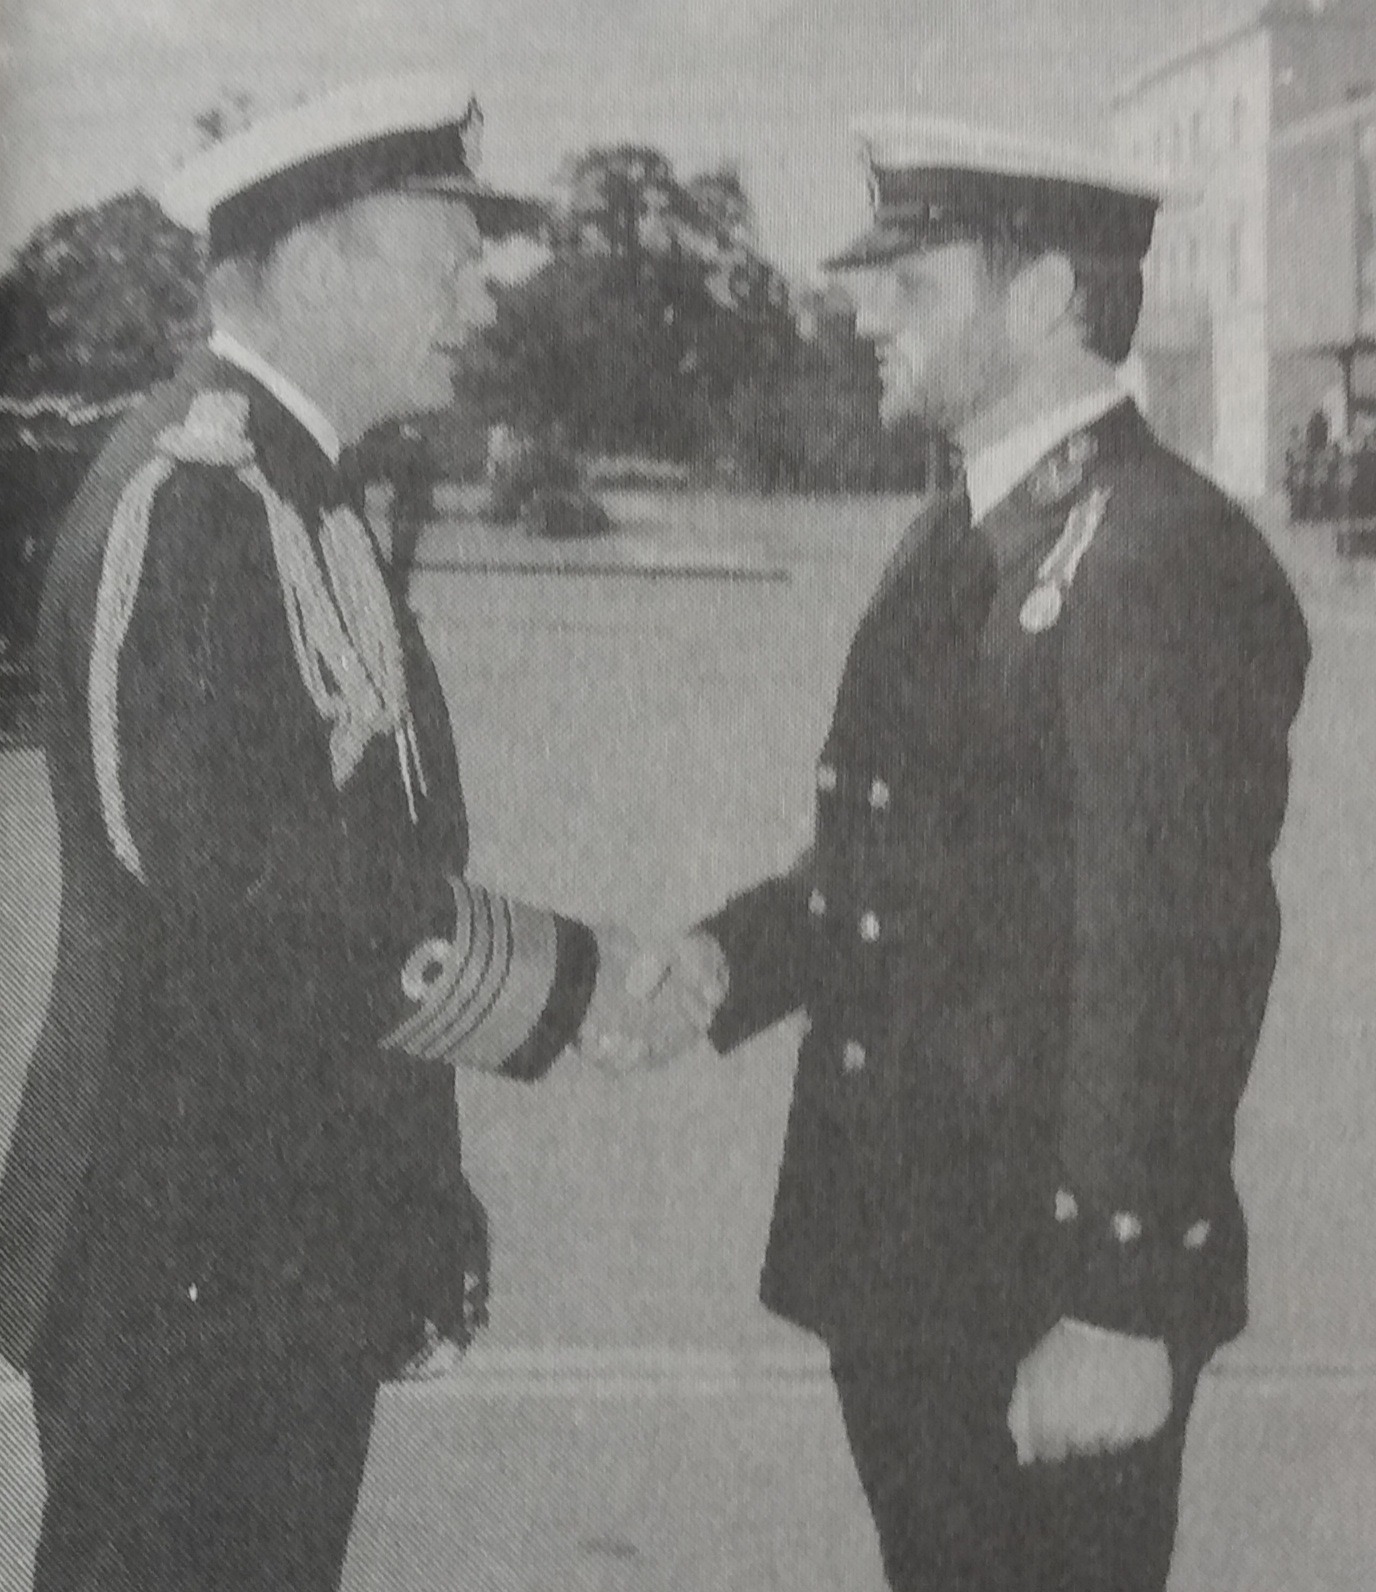 Alan Hitchcock receives his medal from Admiral Jeremy Black